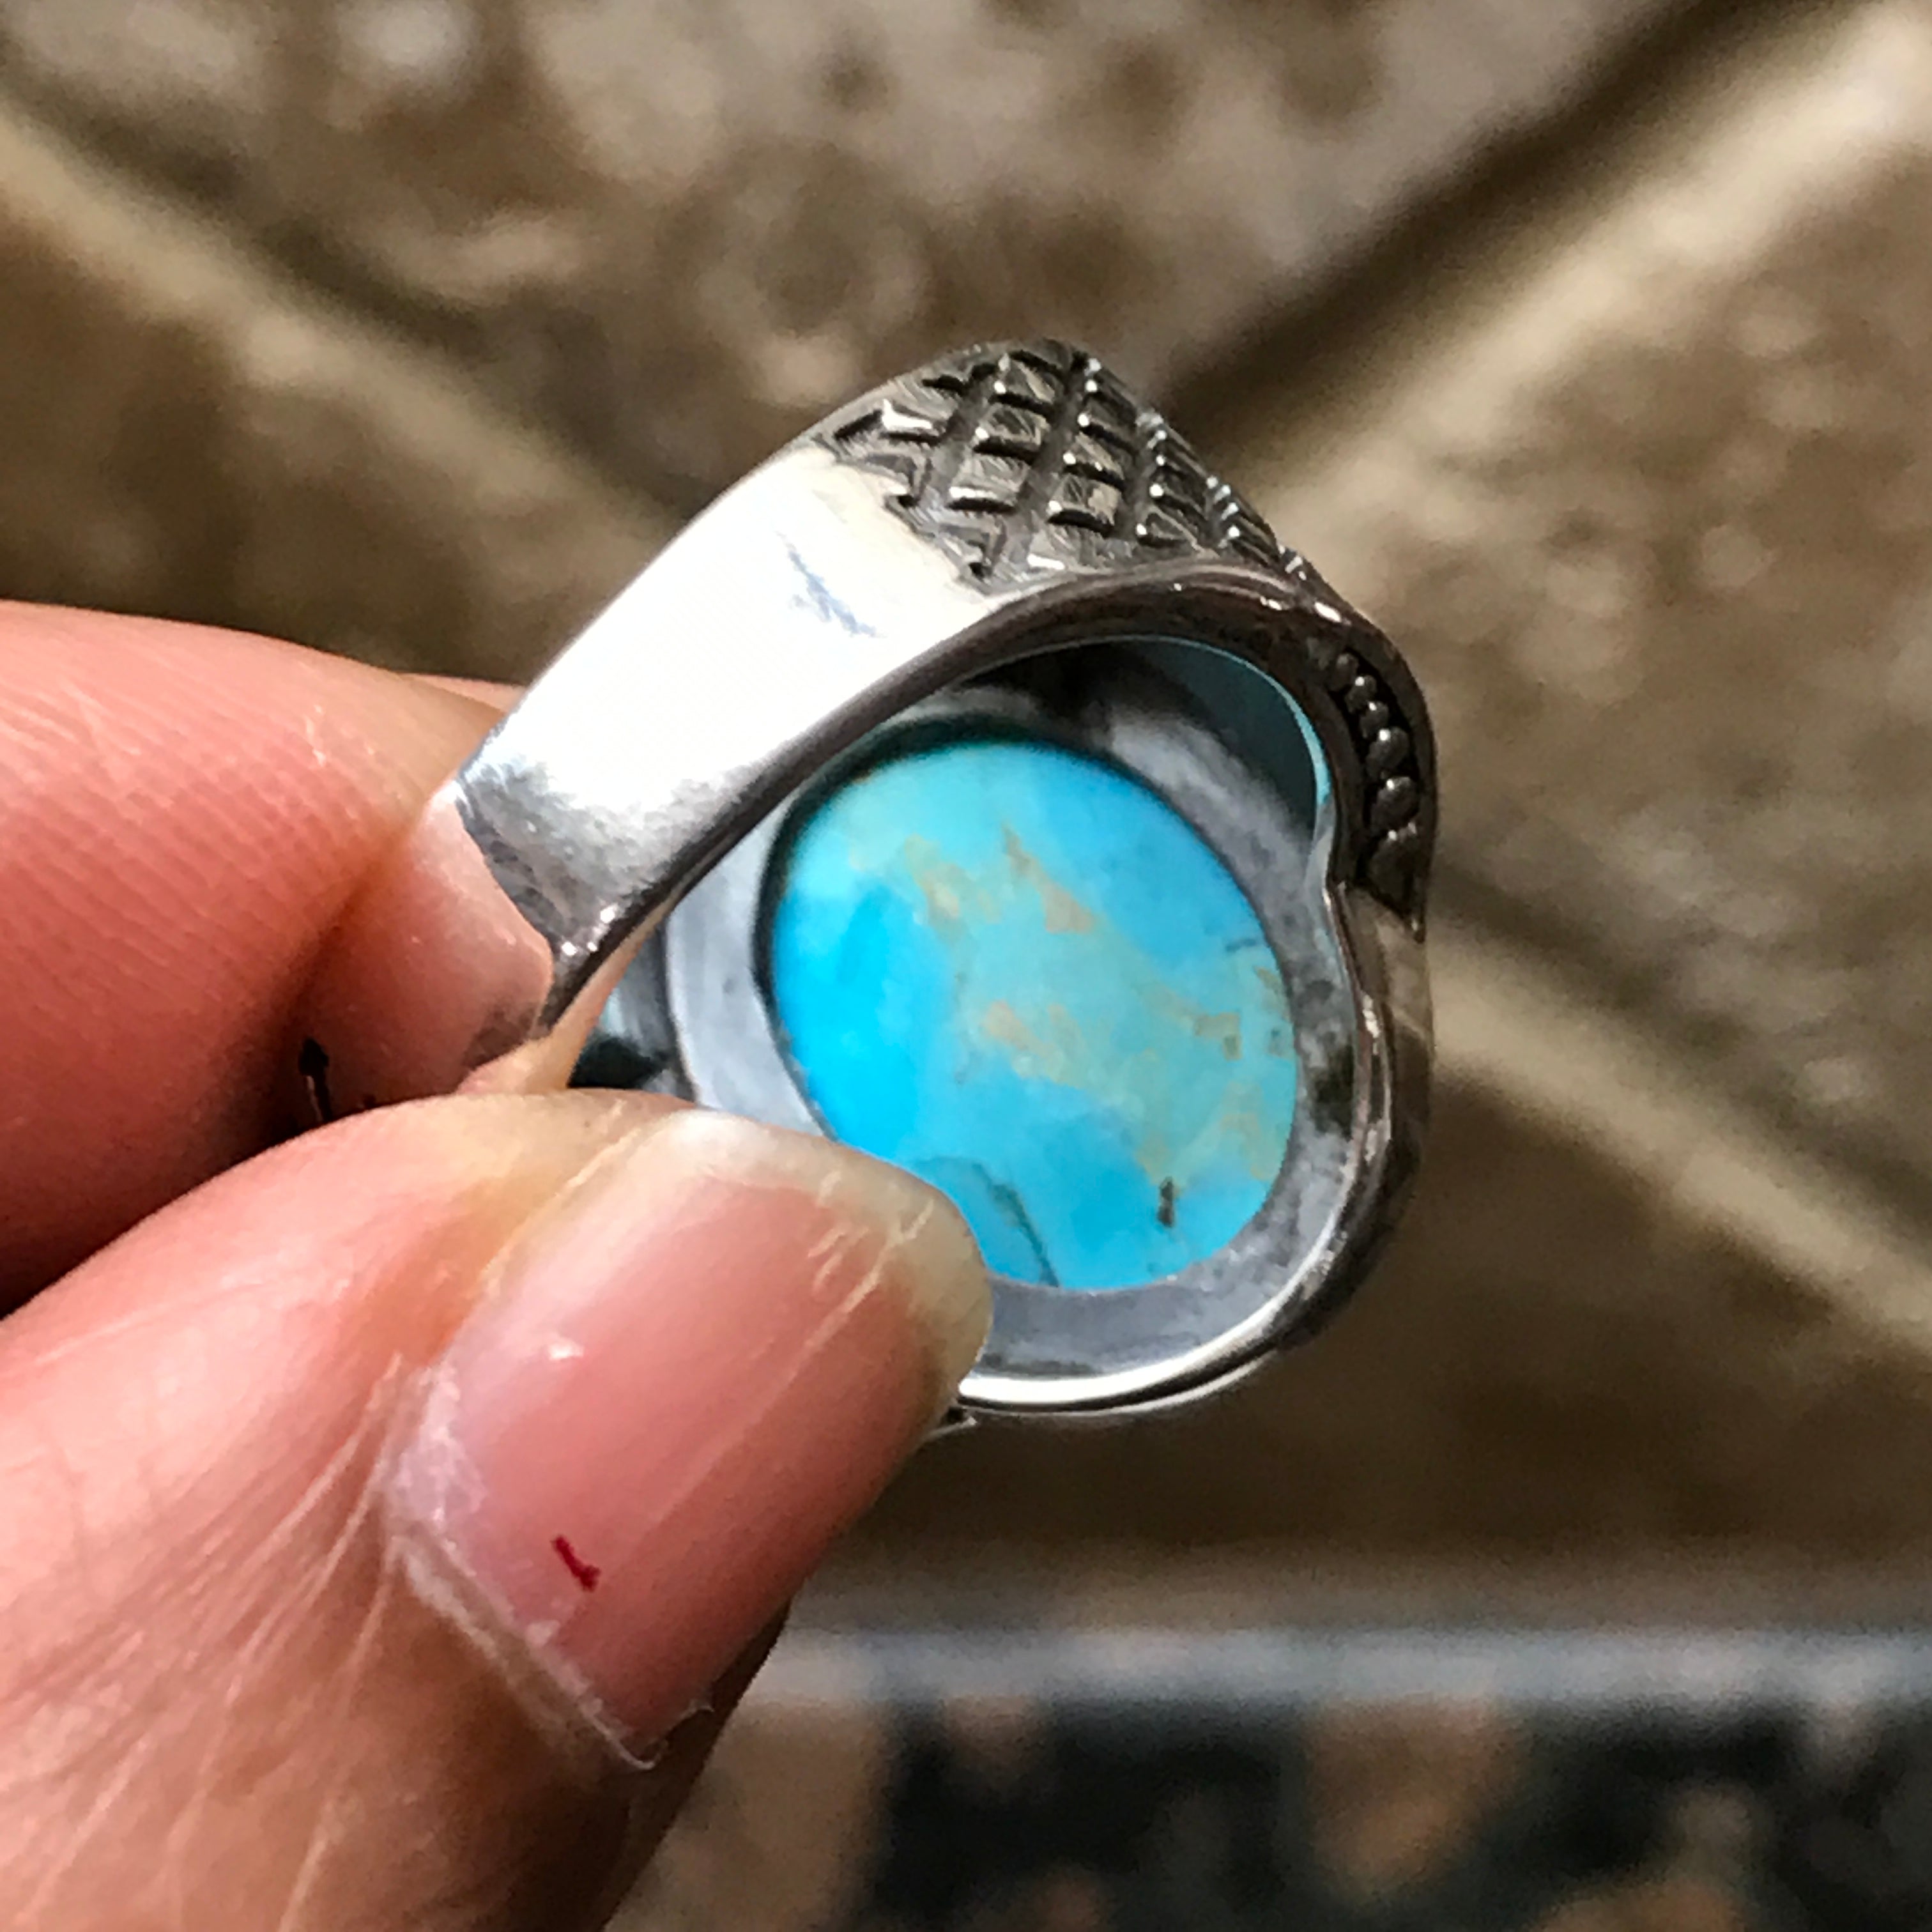 Natural Blue Mohave Turquoise 925 Solid Sterling Silver Men's Ring Size 7, 8, 9, 10, 11, 12 - Natural Rocks by Kala